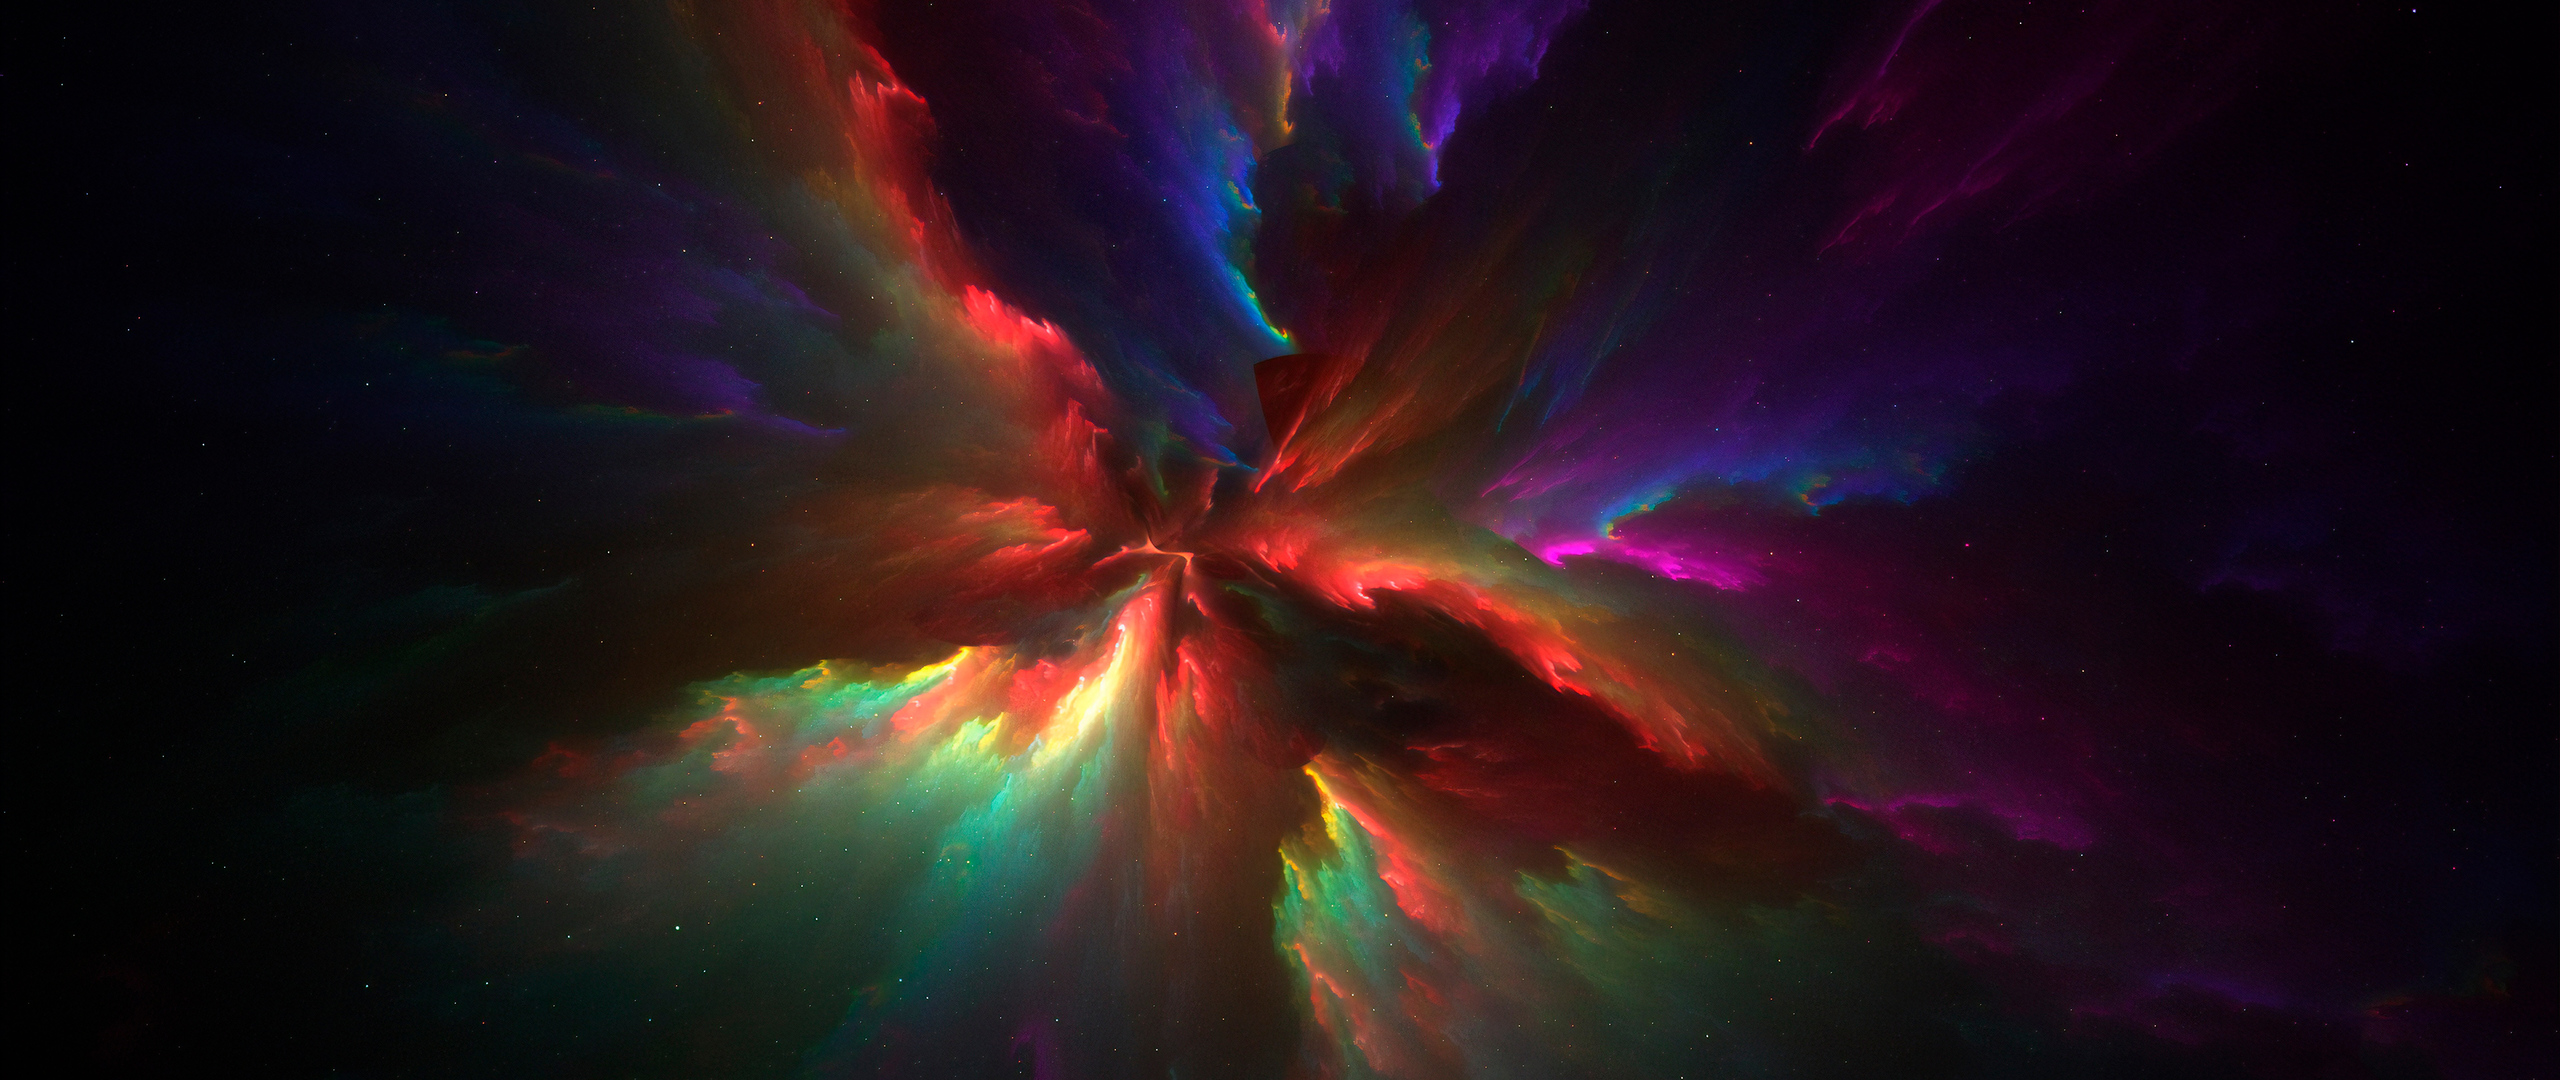 the-colors-of-universe-abstract-4k-h8-2560x1080.jpg